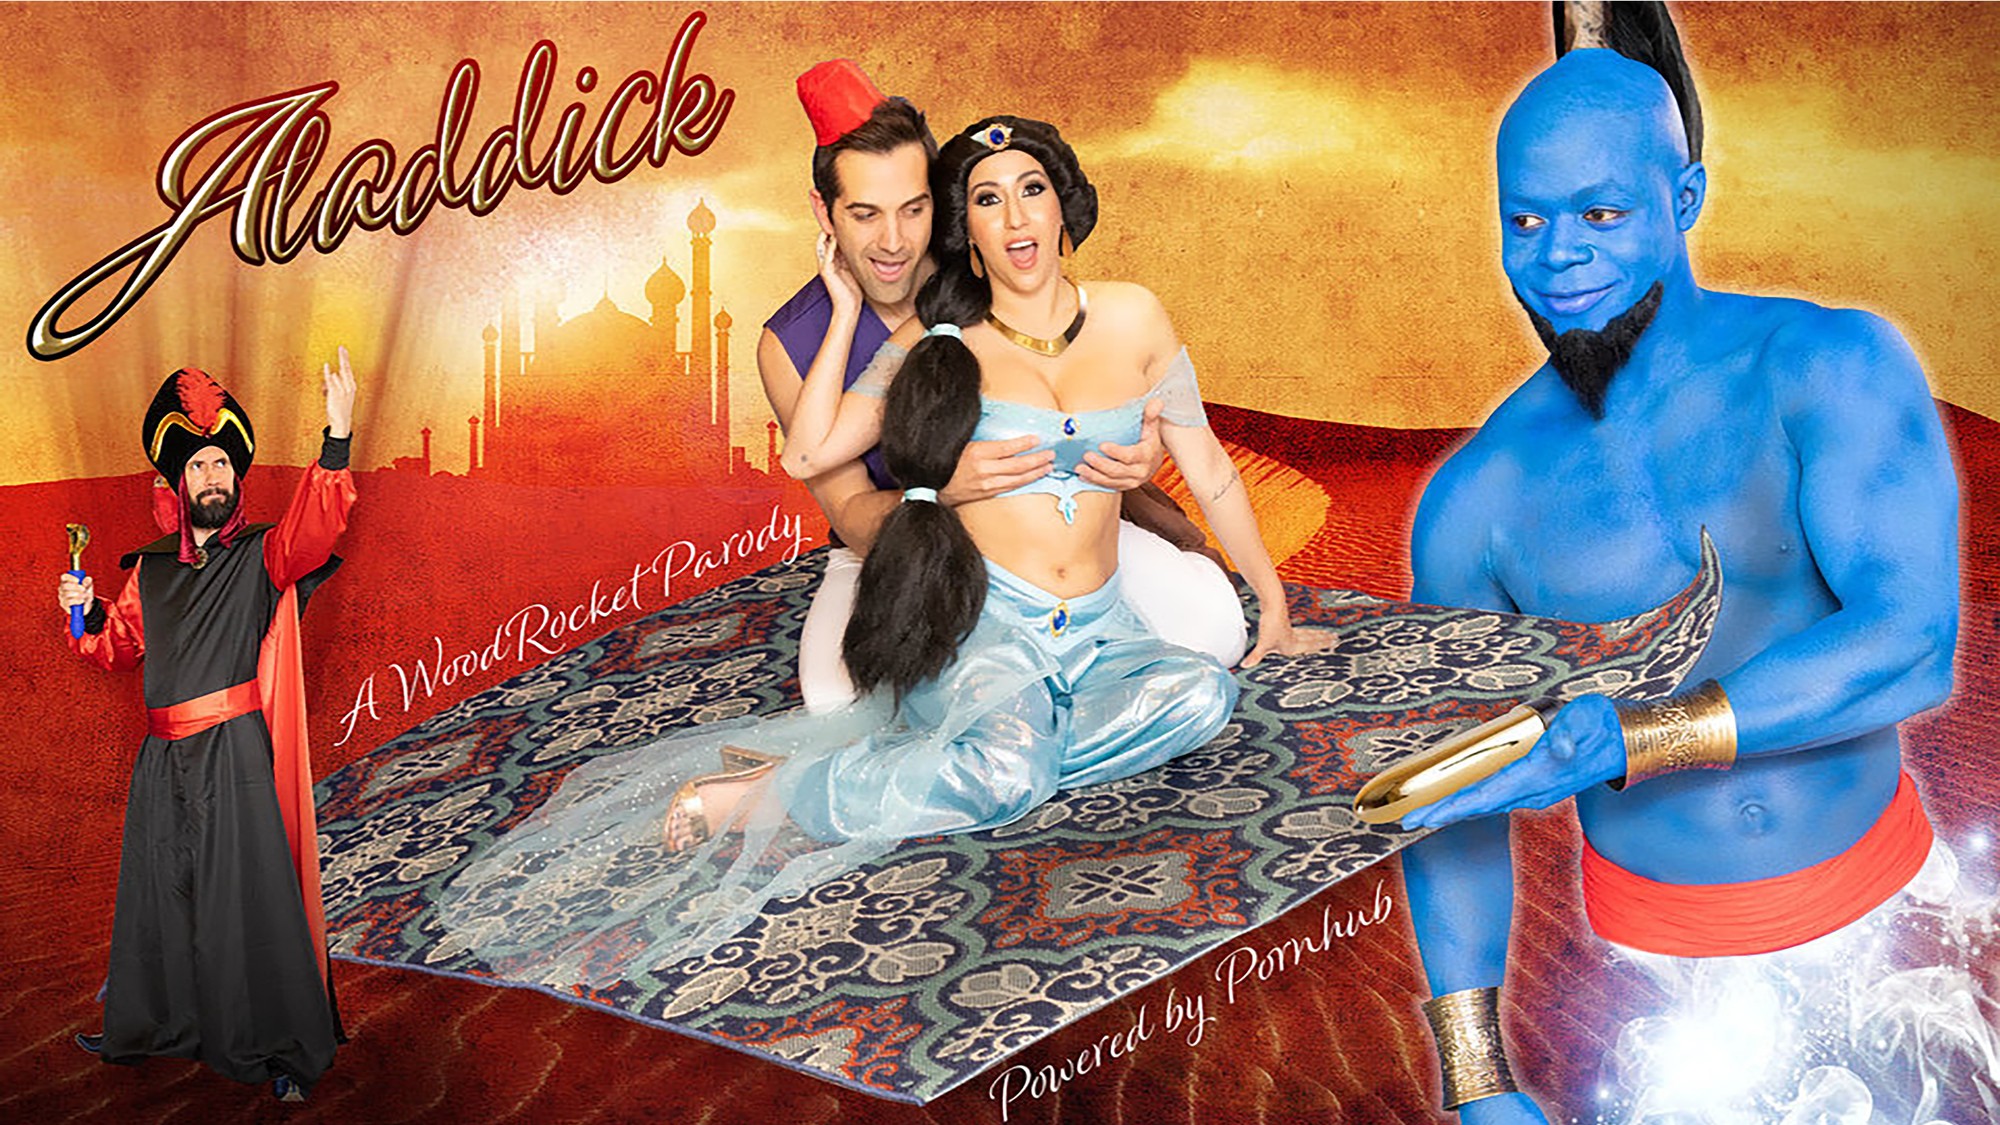 The 'Aladdin' Porn Parody Is Here and We Fixed Its Title - VICE